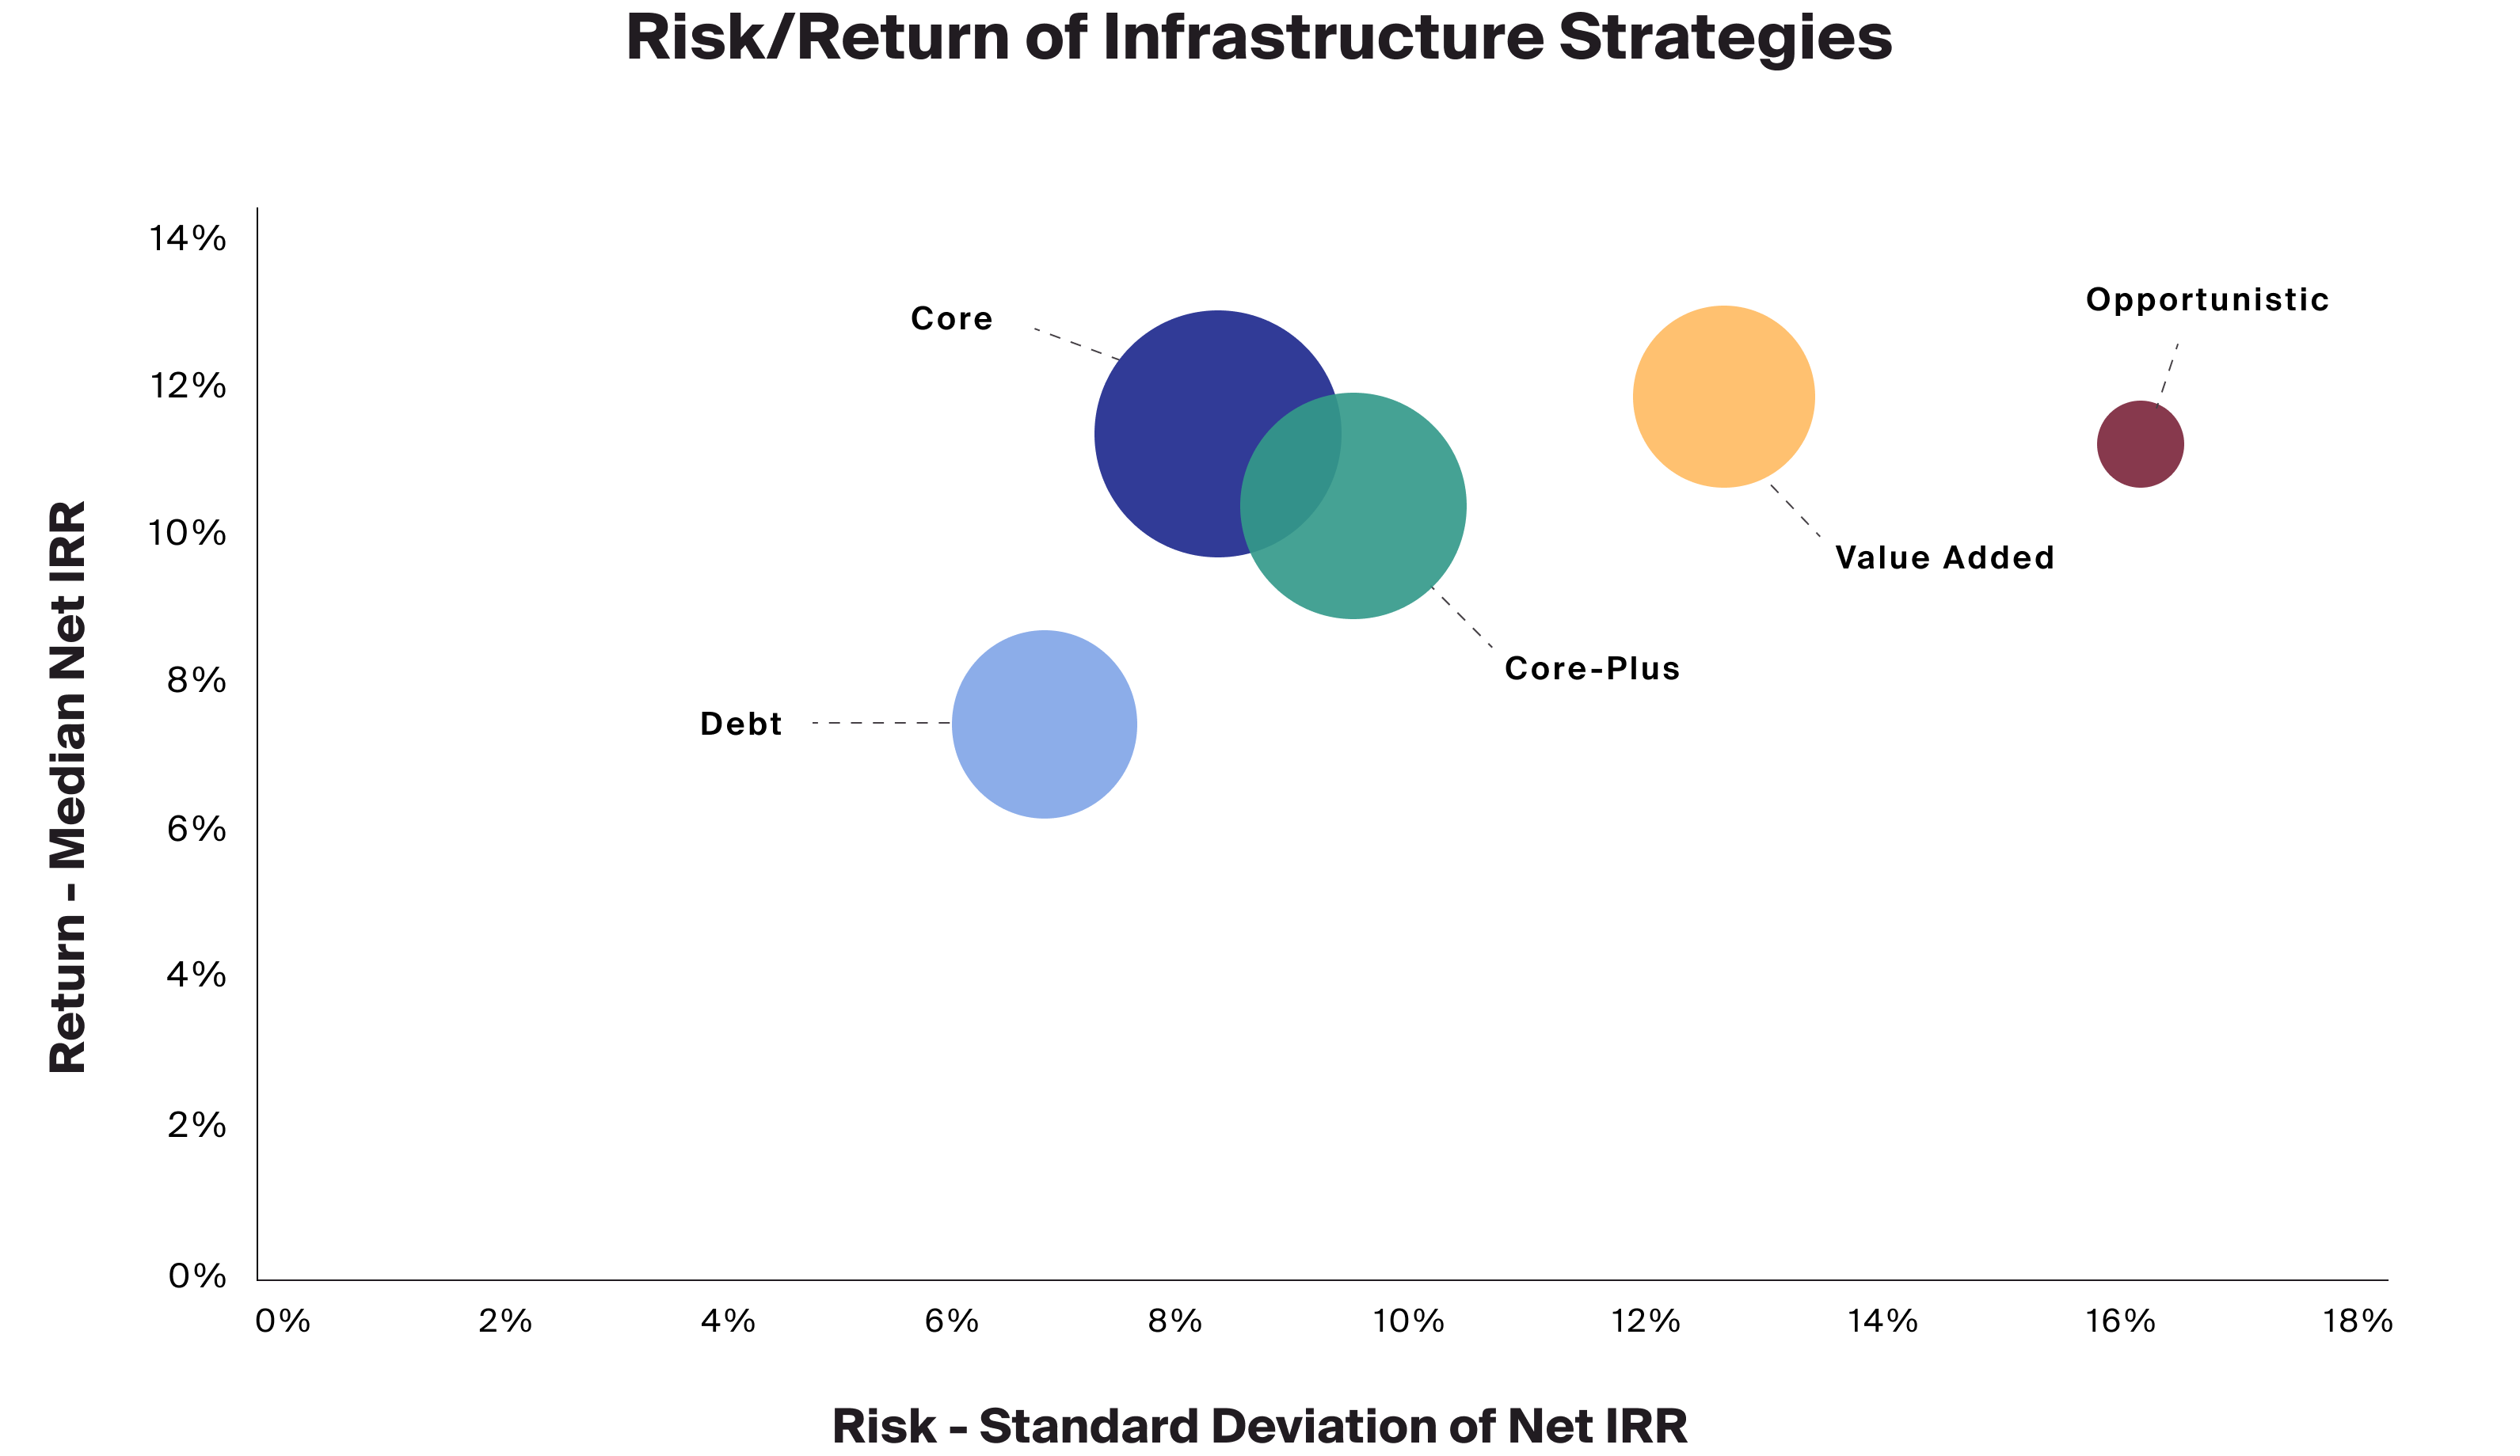 Exhibit 3: Infrastructure strategies exhibit a variety of risk and return profiles